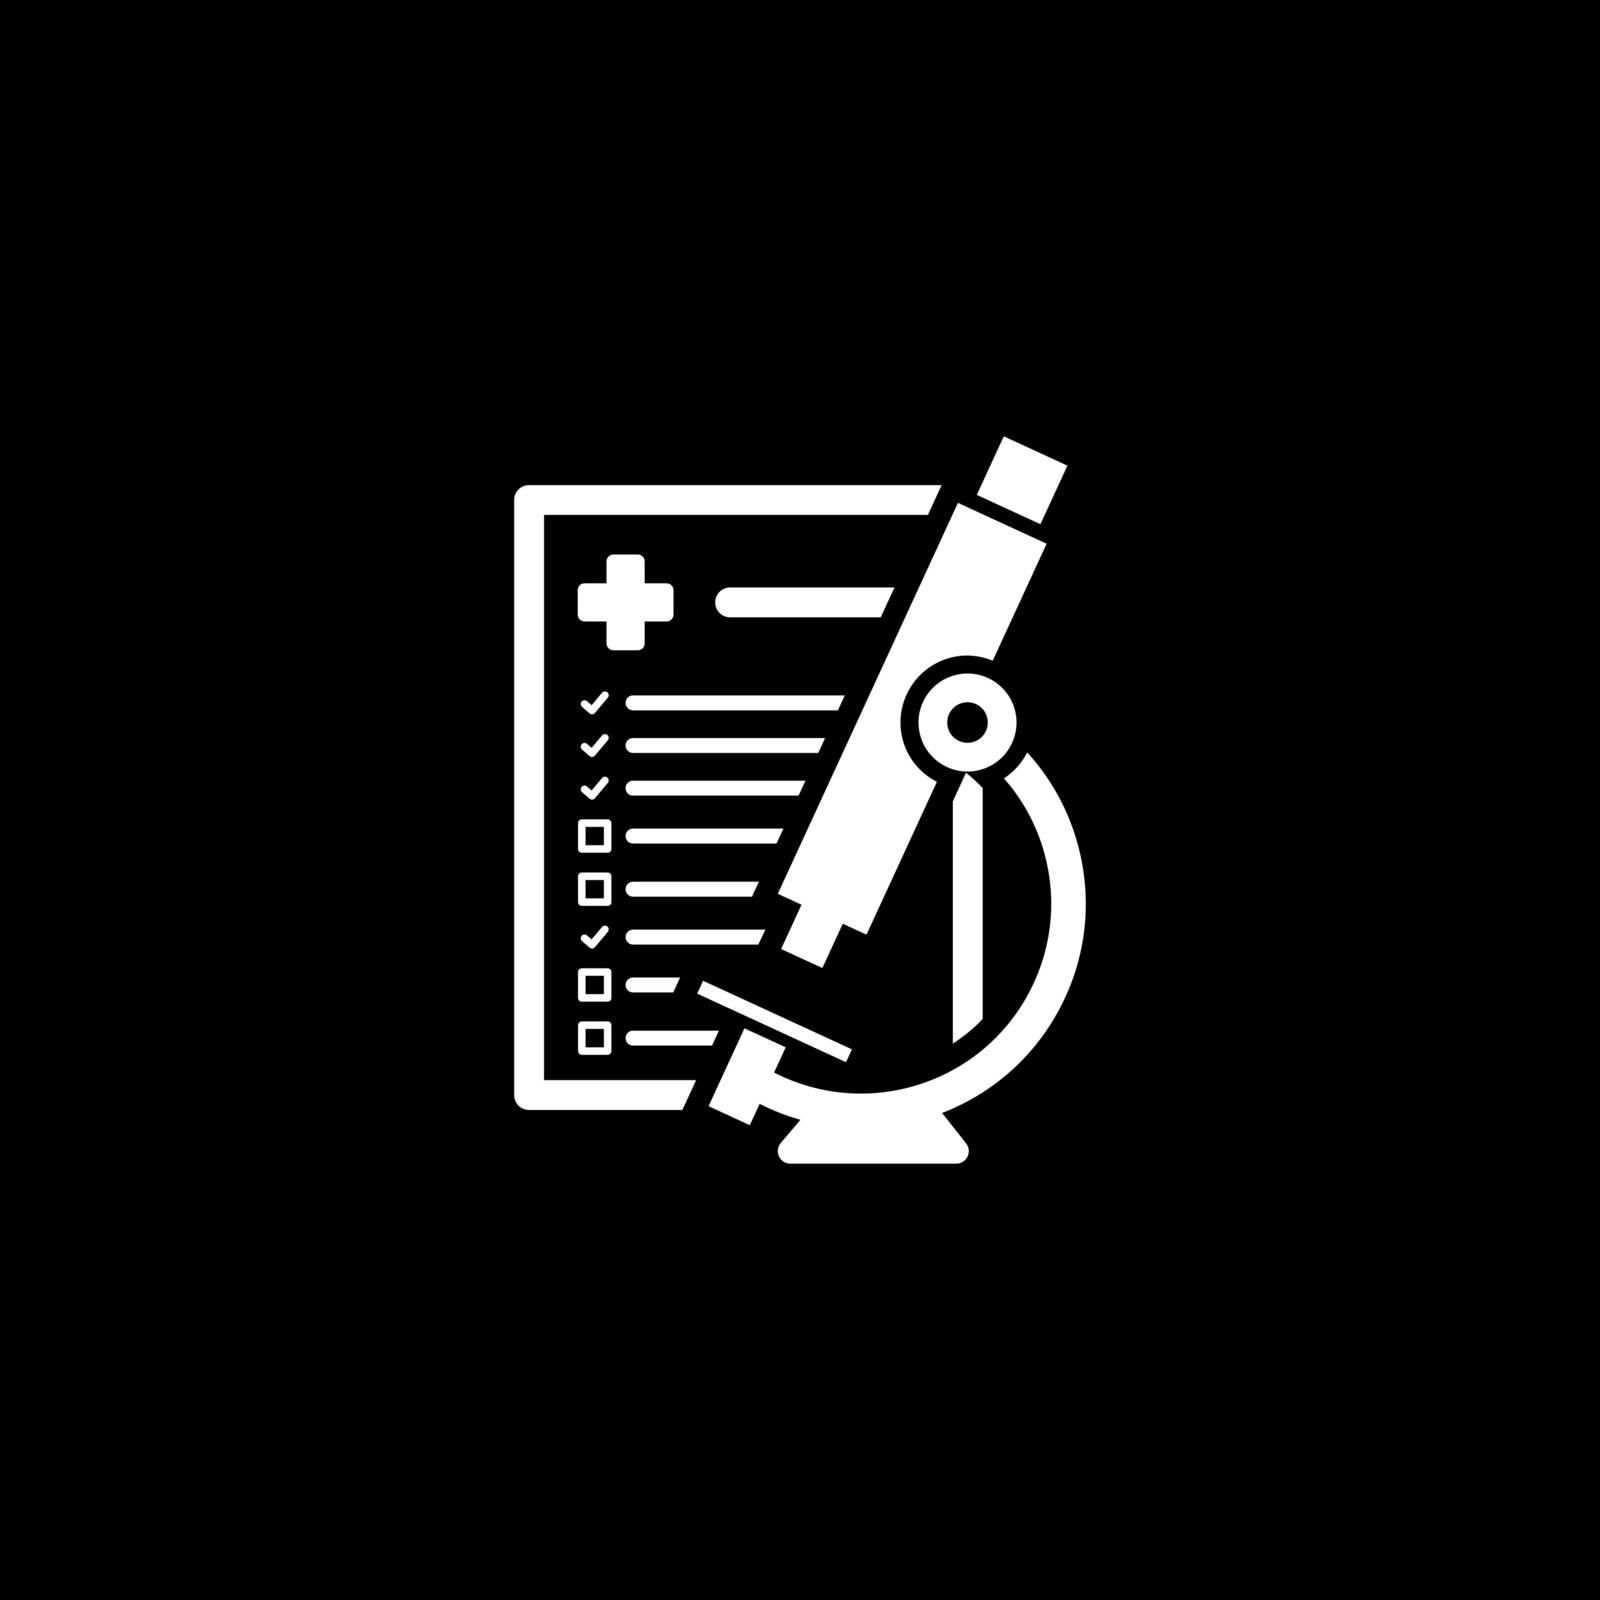 Laboratory Analysis and Medical Services Icon. Flat Design. Isolated.